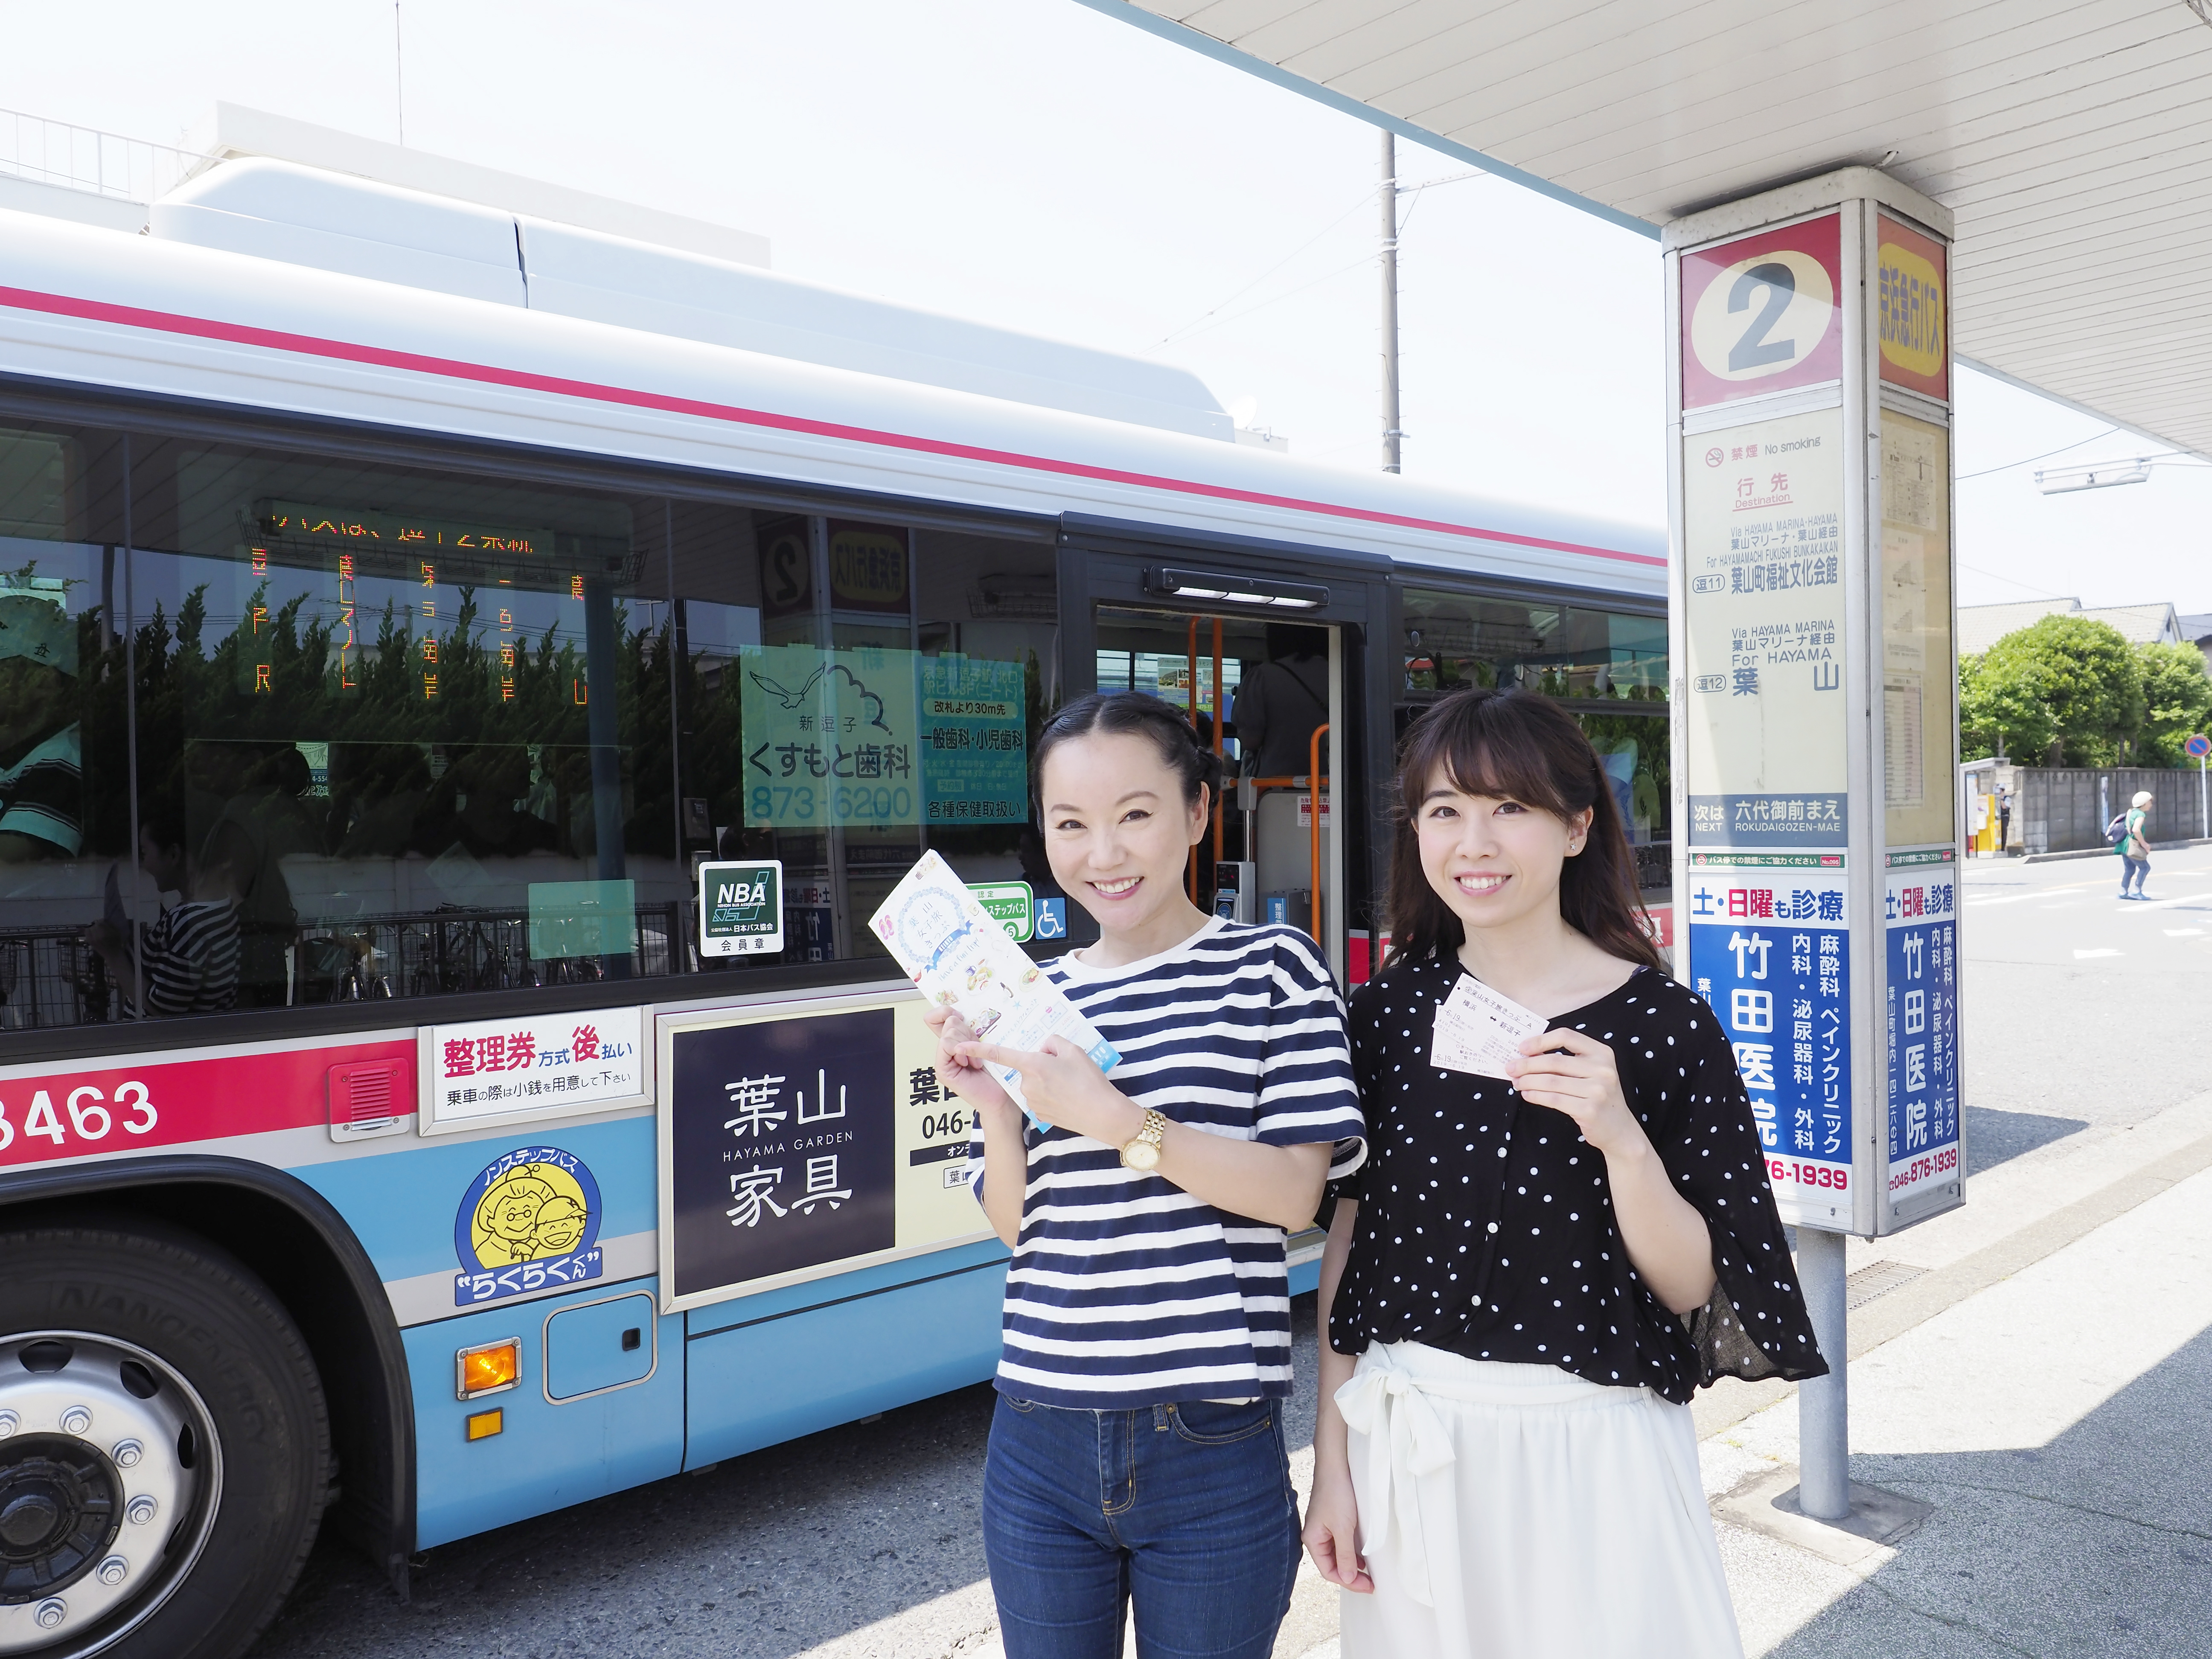 Grab the “Hayama Women’s Trip Ticket” and head out for sightseeing in Zushi and Hayama!